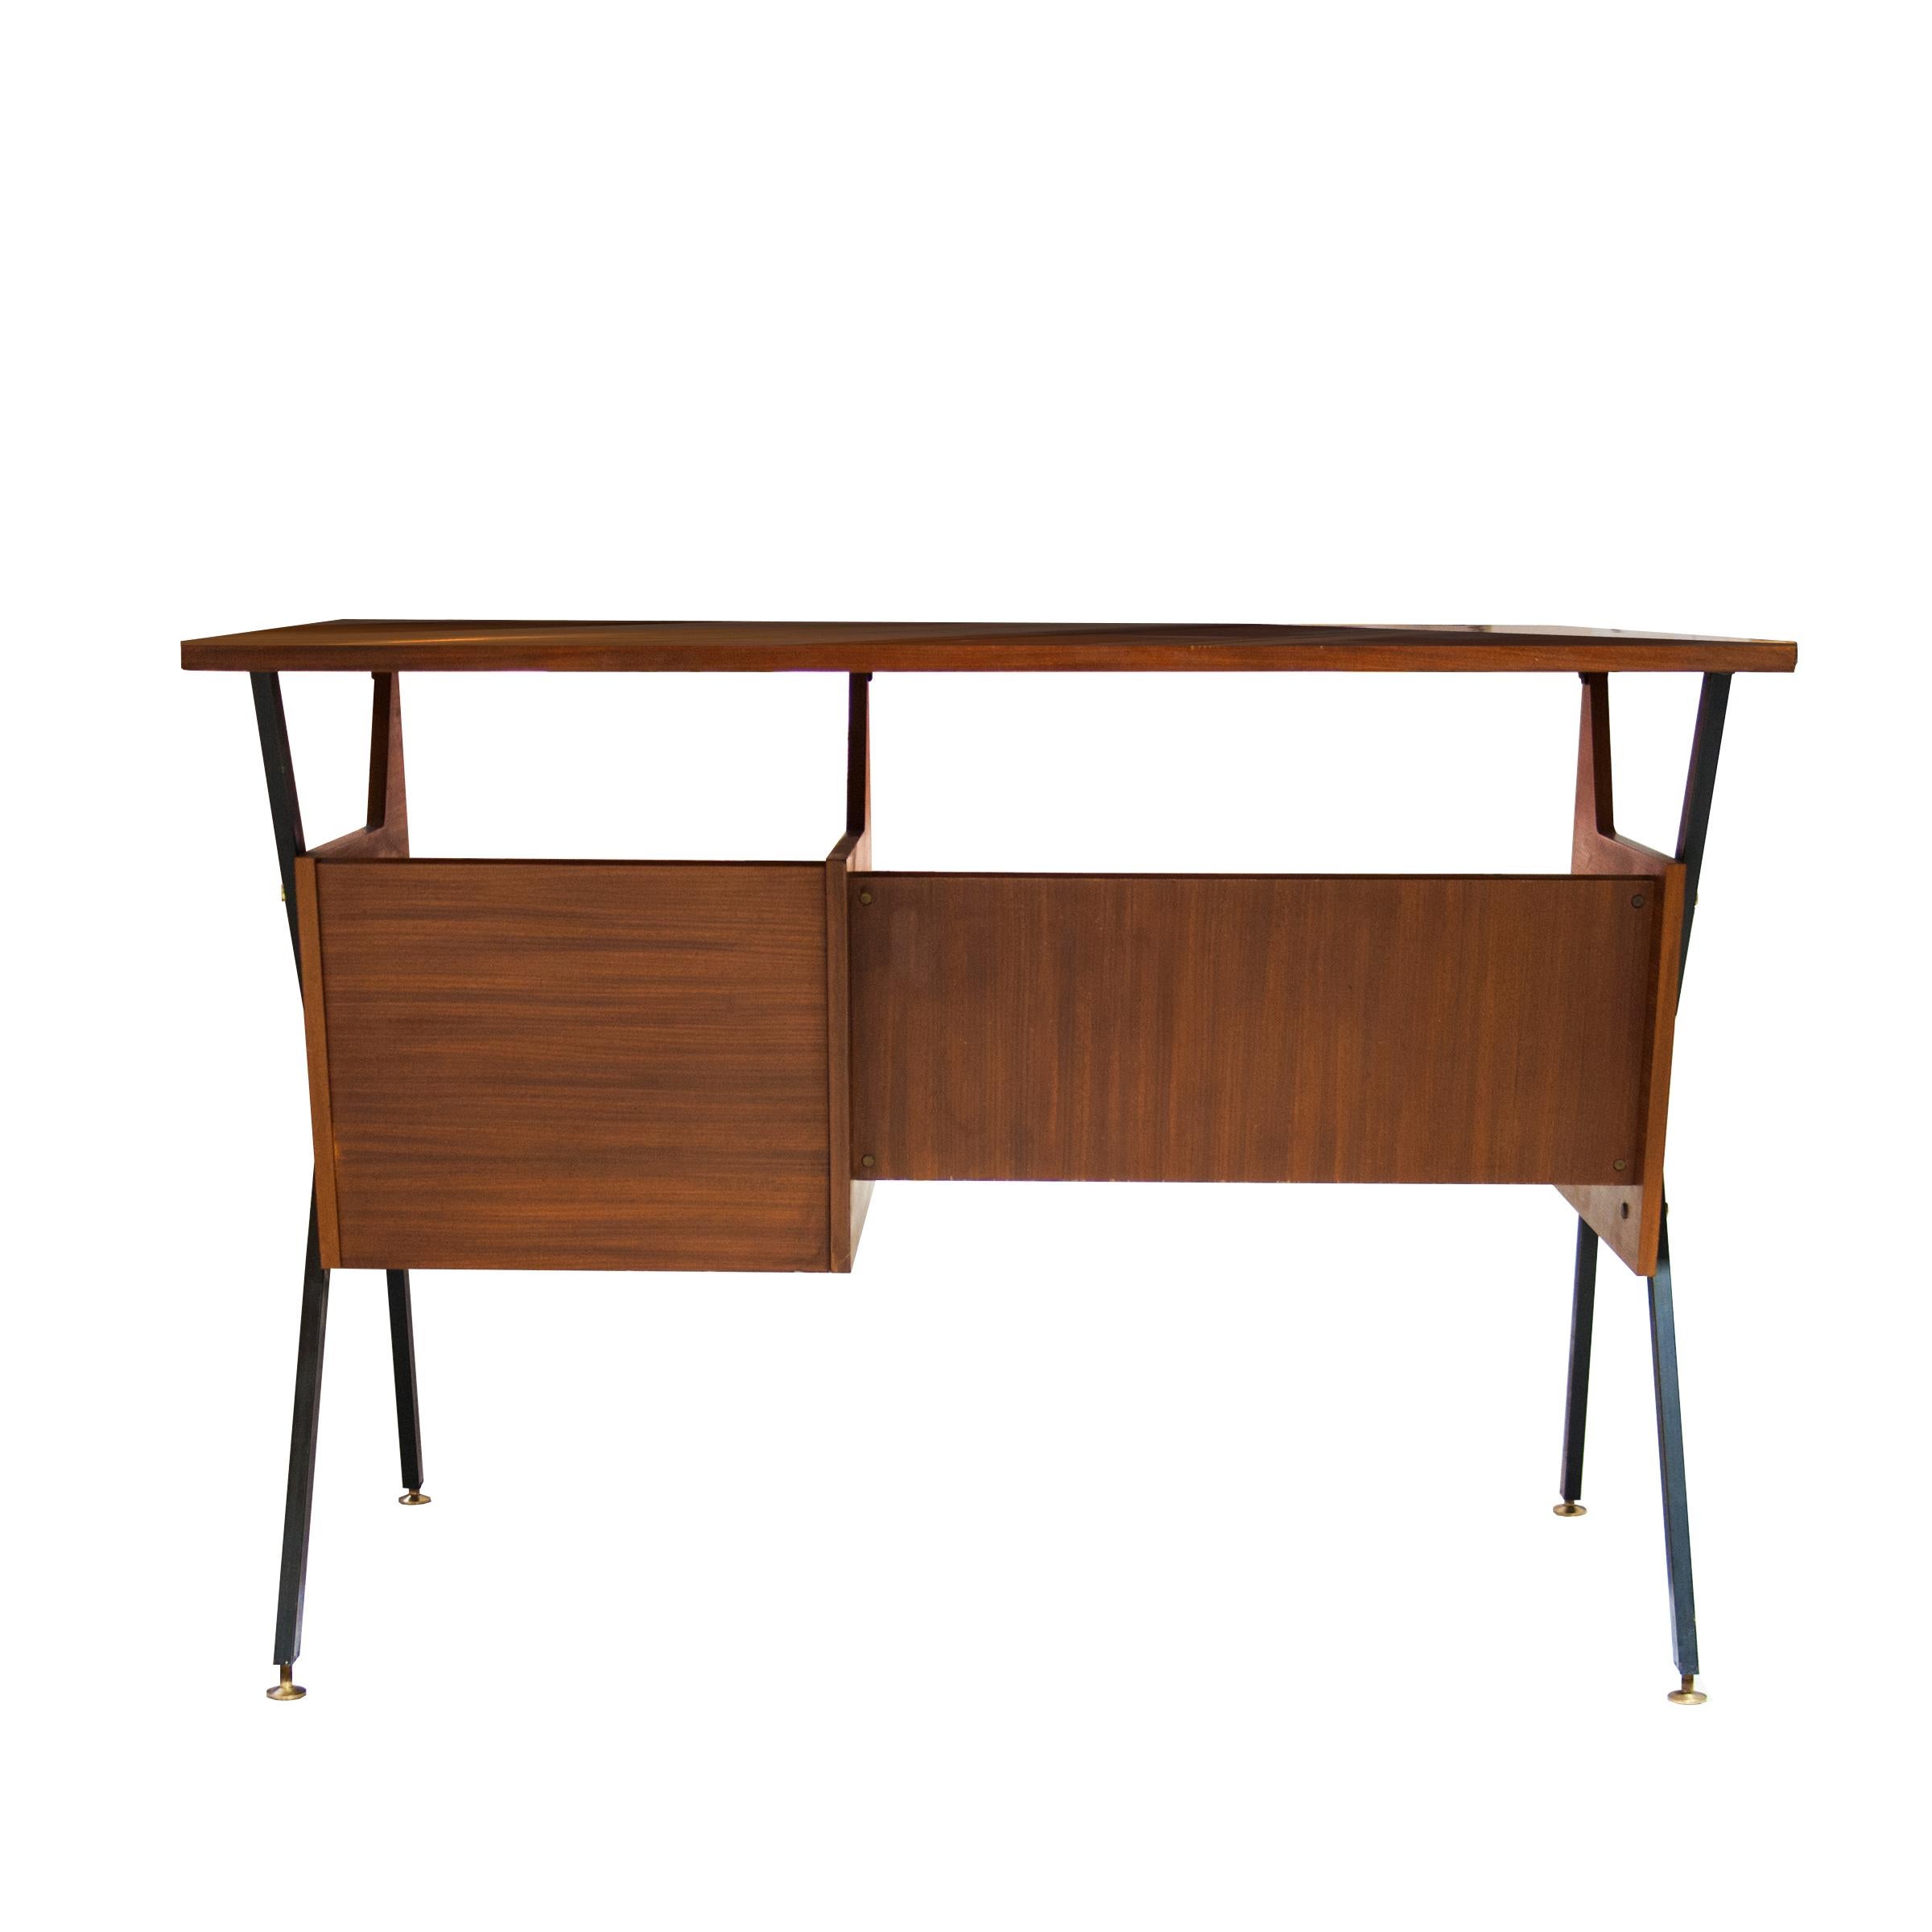 Mid-Century Modern Italian Teak Desk with Lacquered Brass Structure, Italy, 1950 For Sale 1